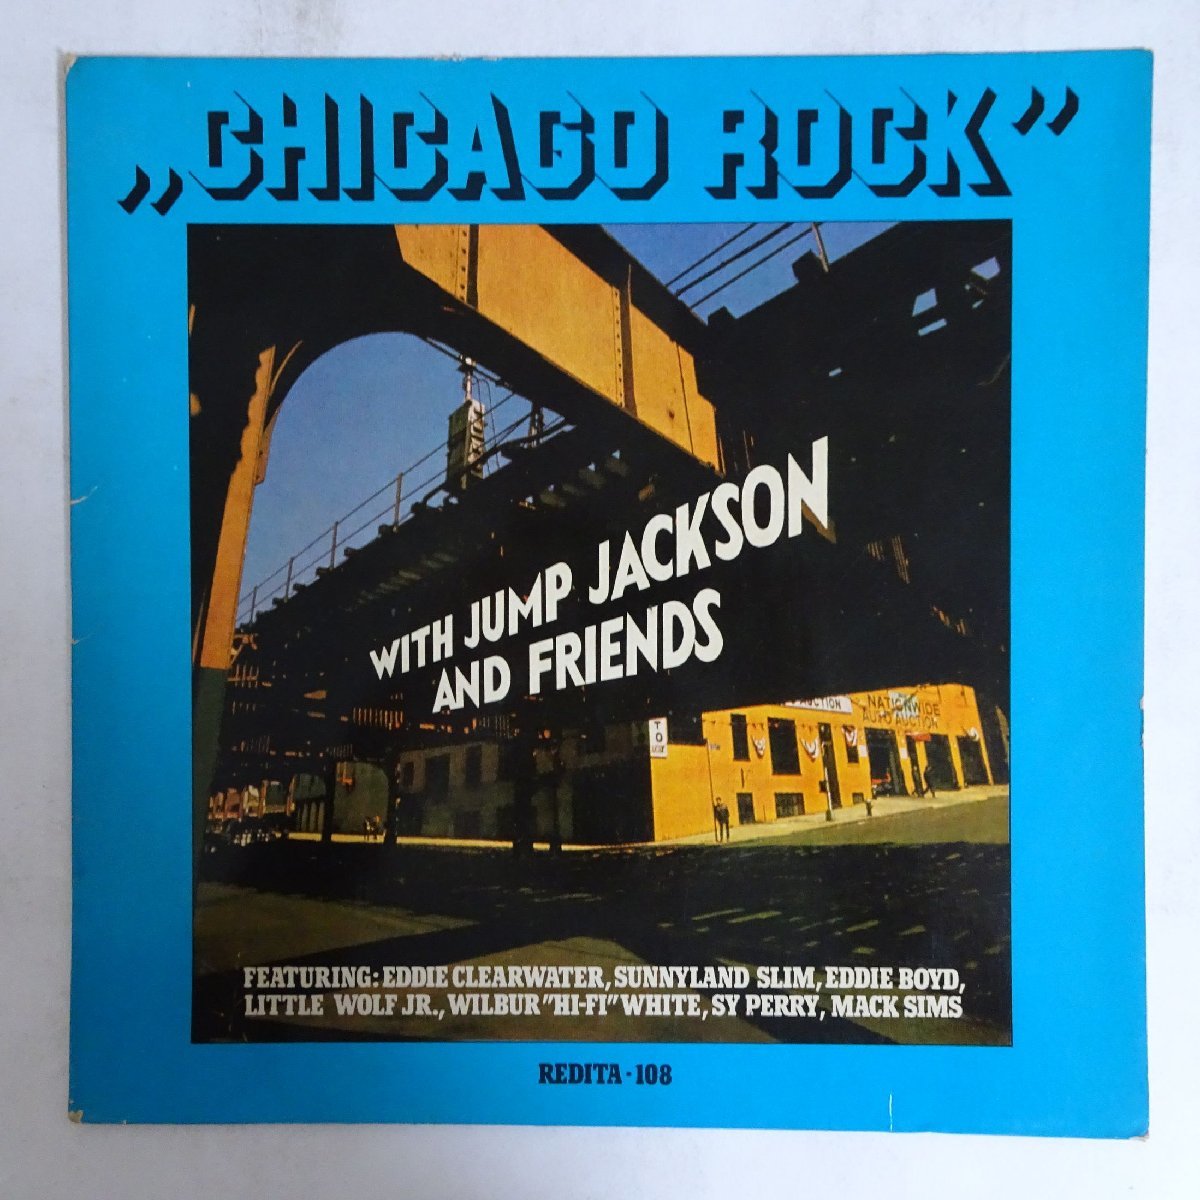 11174689;【Netherlands盤/MONO/コーティング/REDITA REORDS】Various / Chicago Rock / With Jump Jackson And Friends_画像1